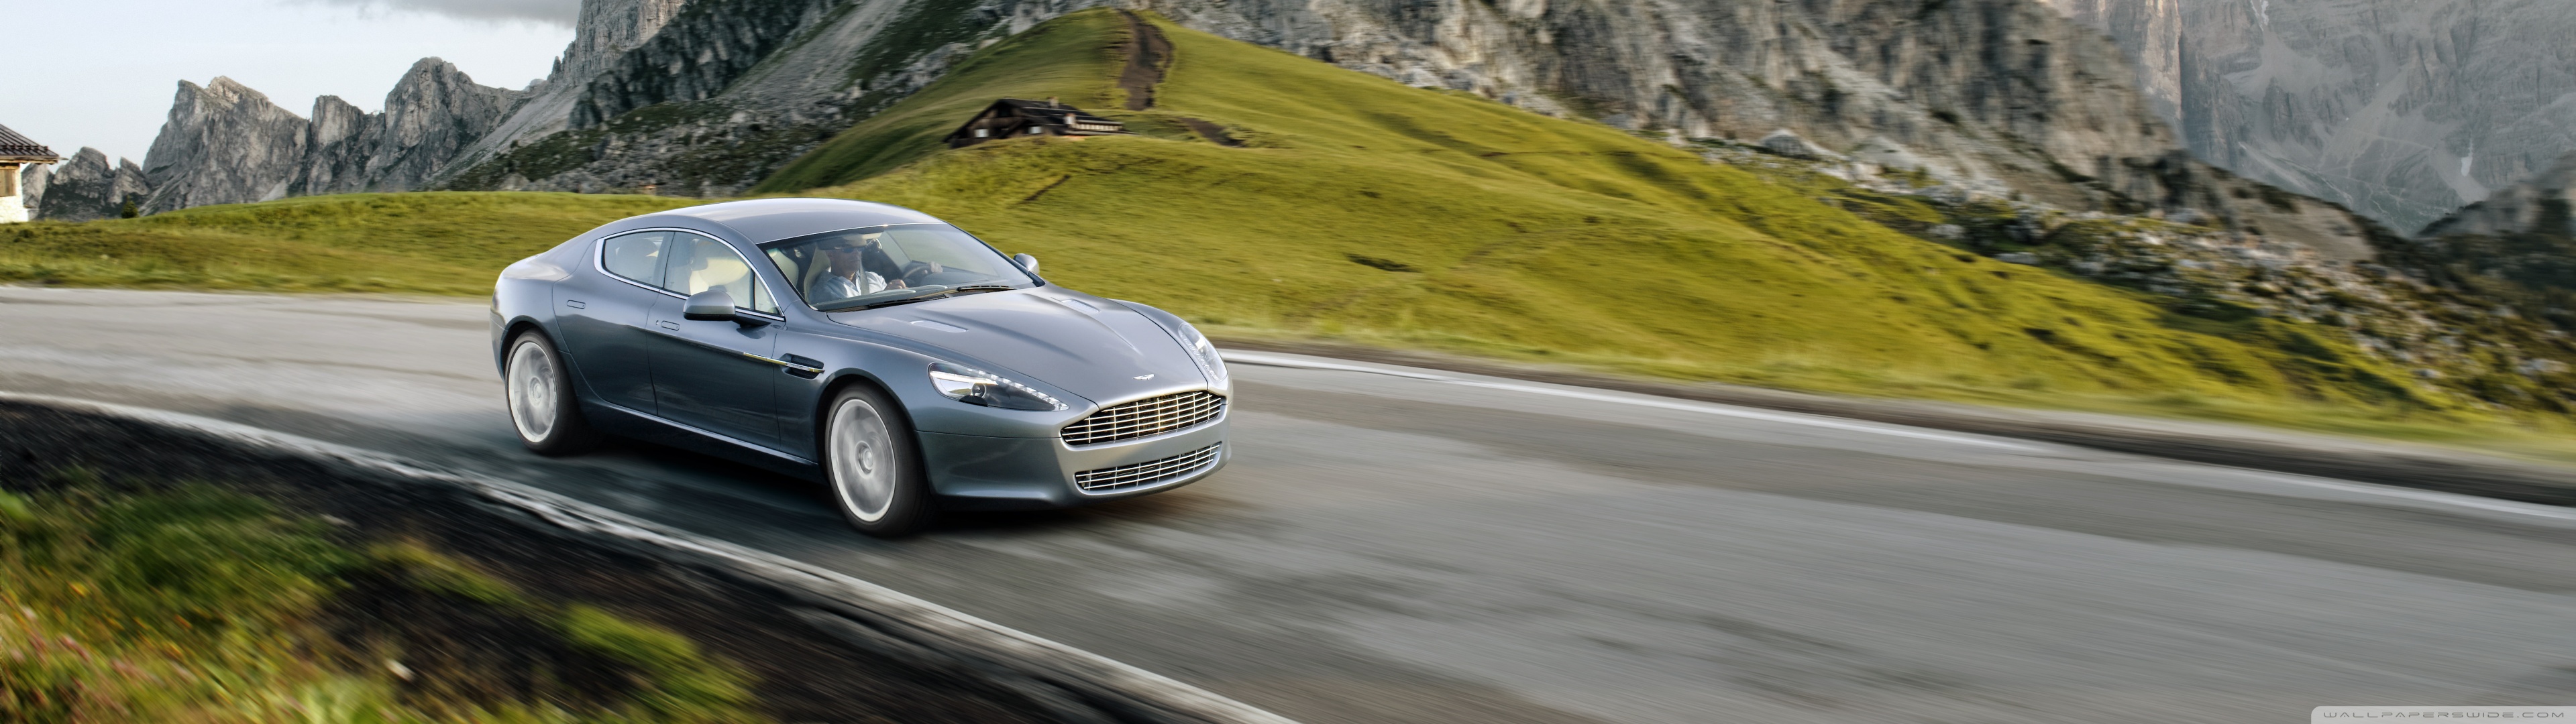 Aston Martin On The Road Ultra Hd Desktop Background Wallpaper For Multi Display Dual Monitor Tablet Smartphone